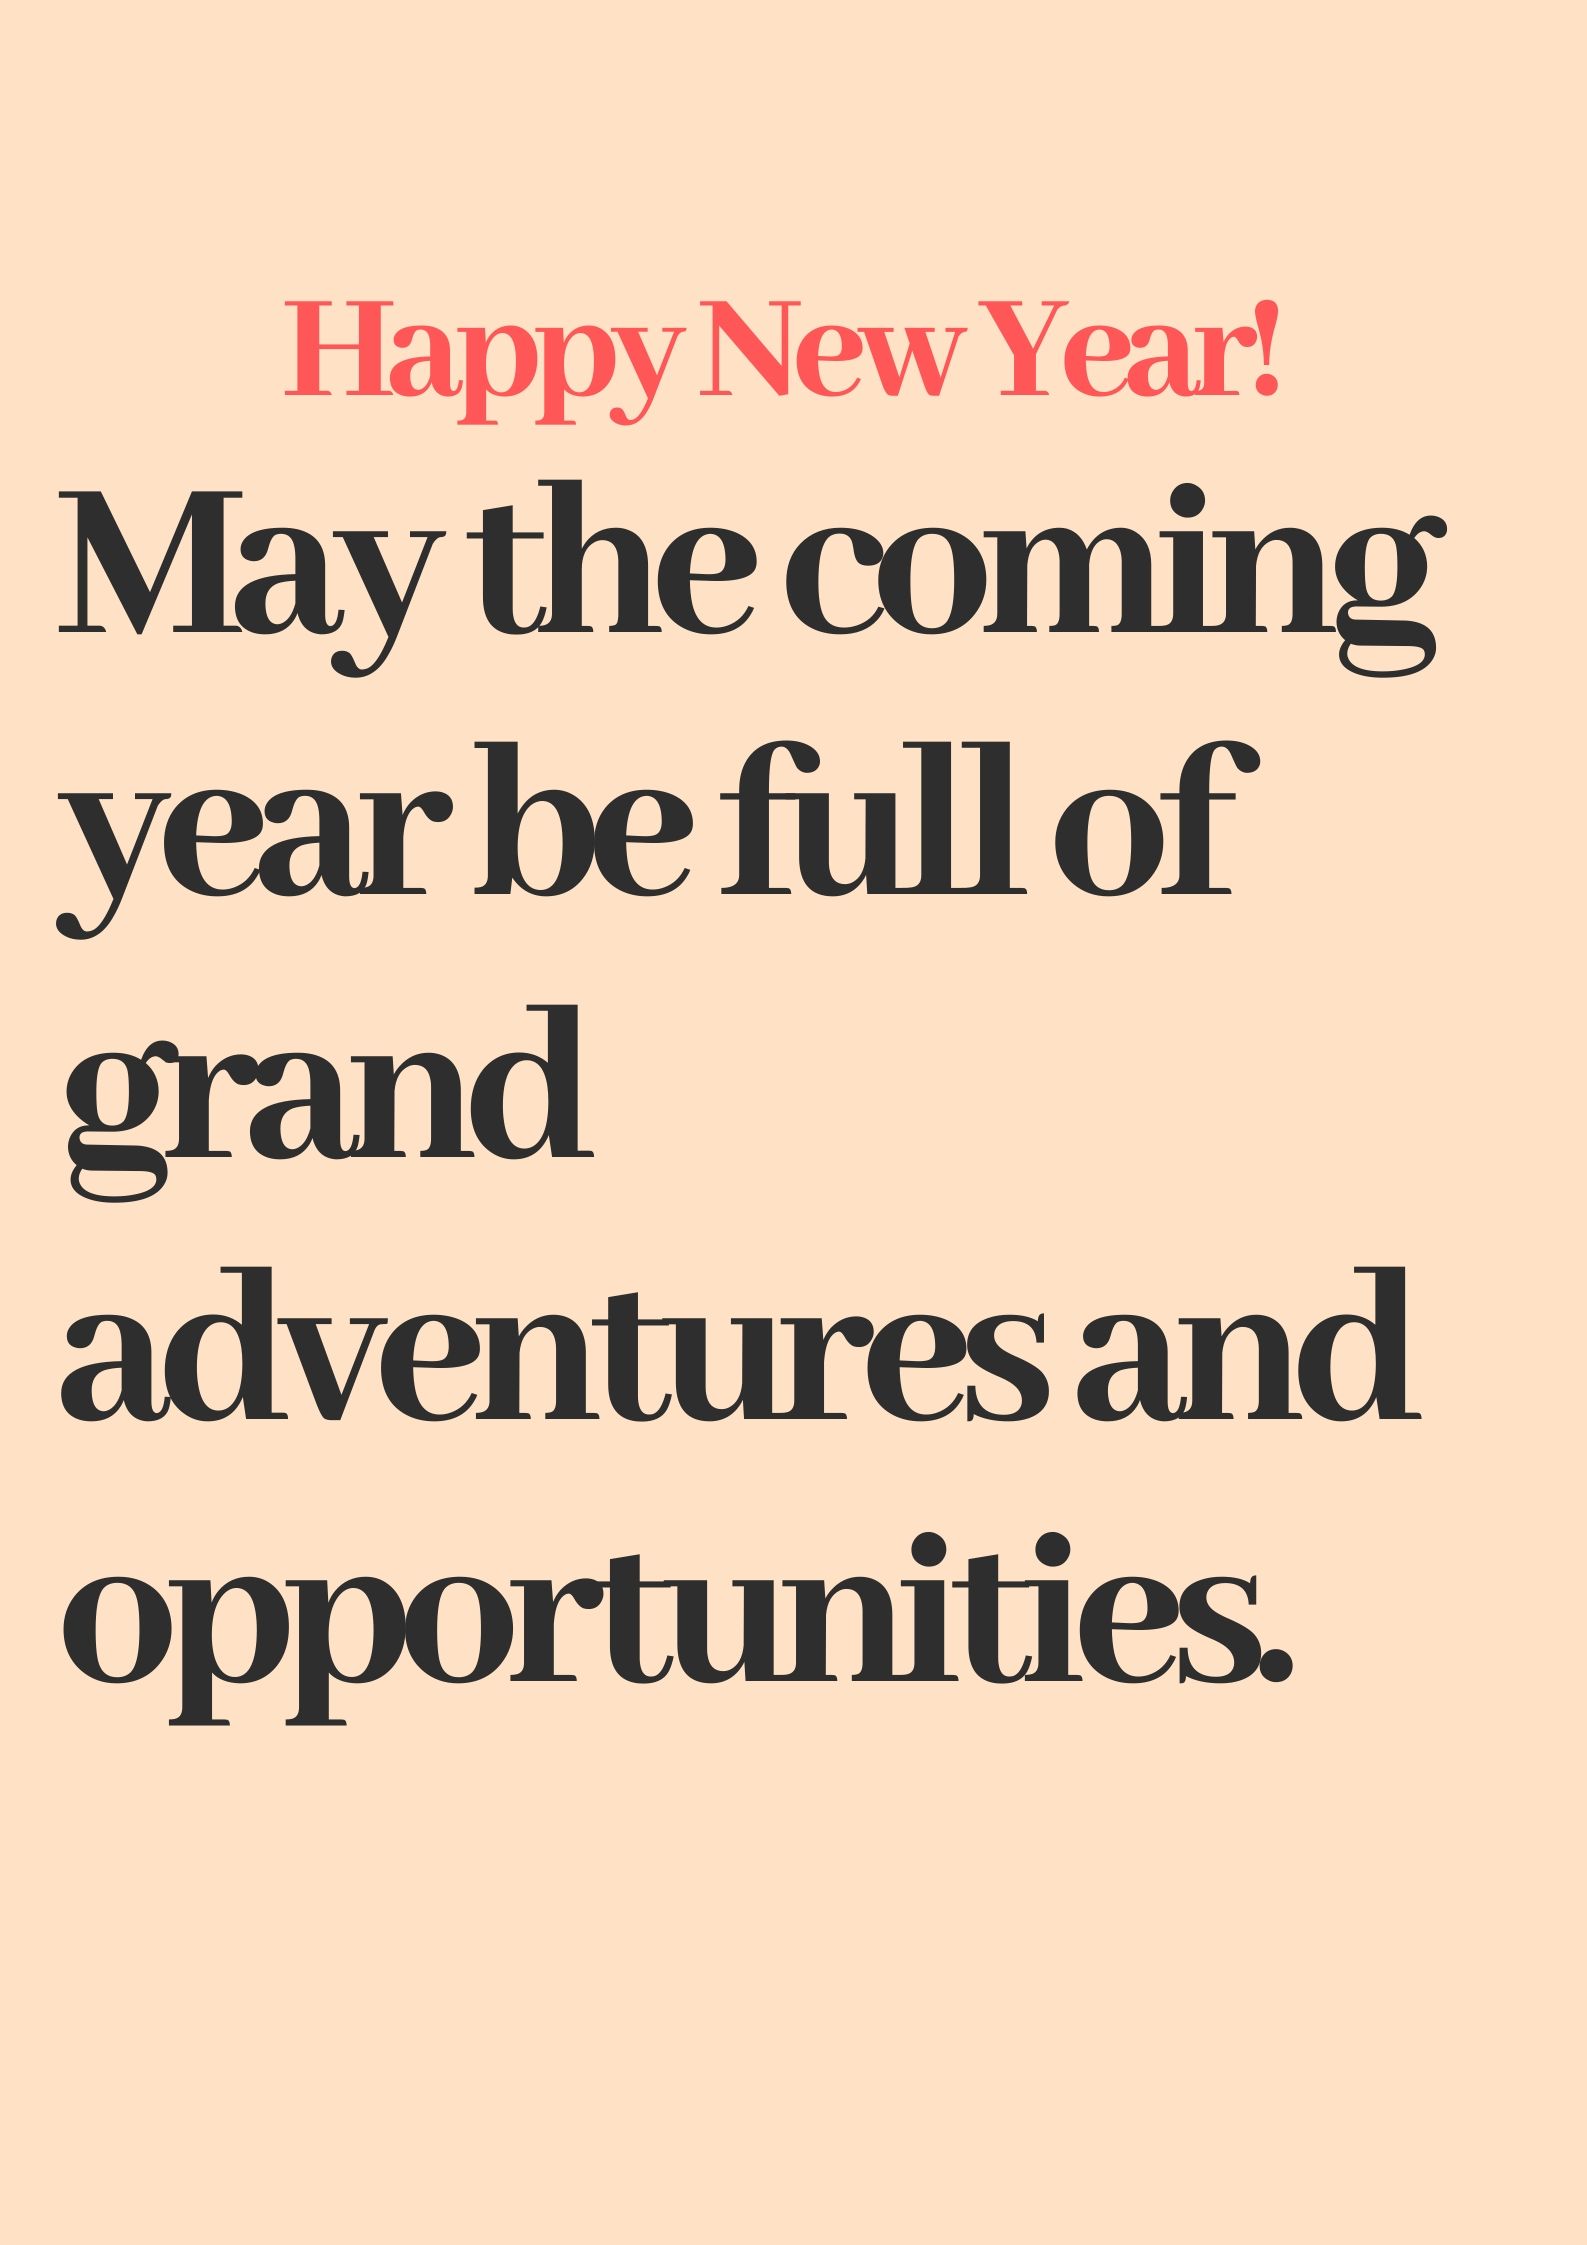 Happy New Year! May the coming year be full of grand adventures and opportunities.